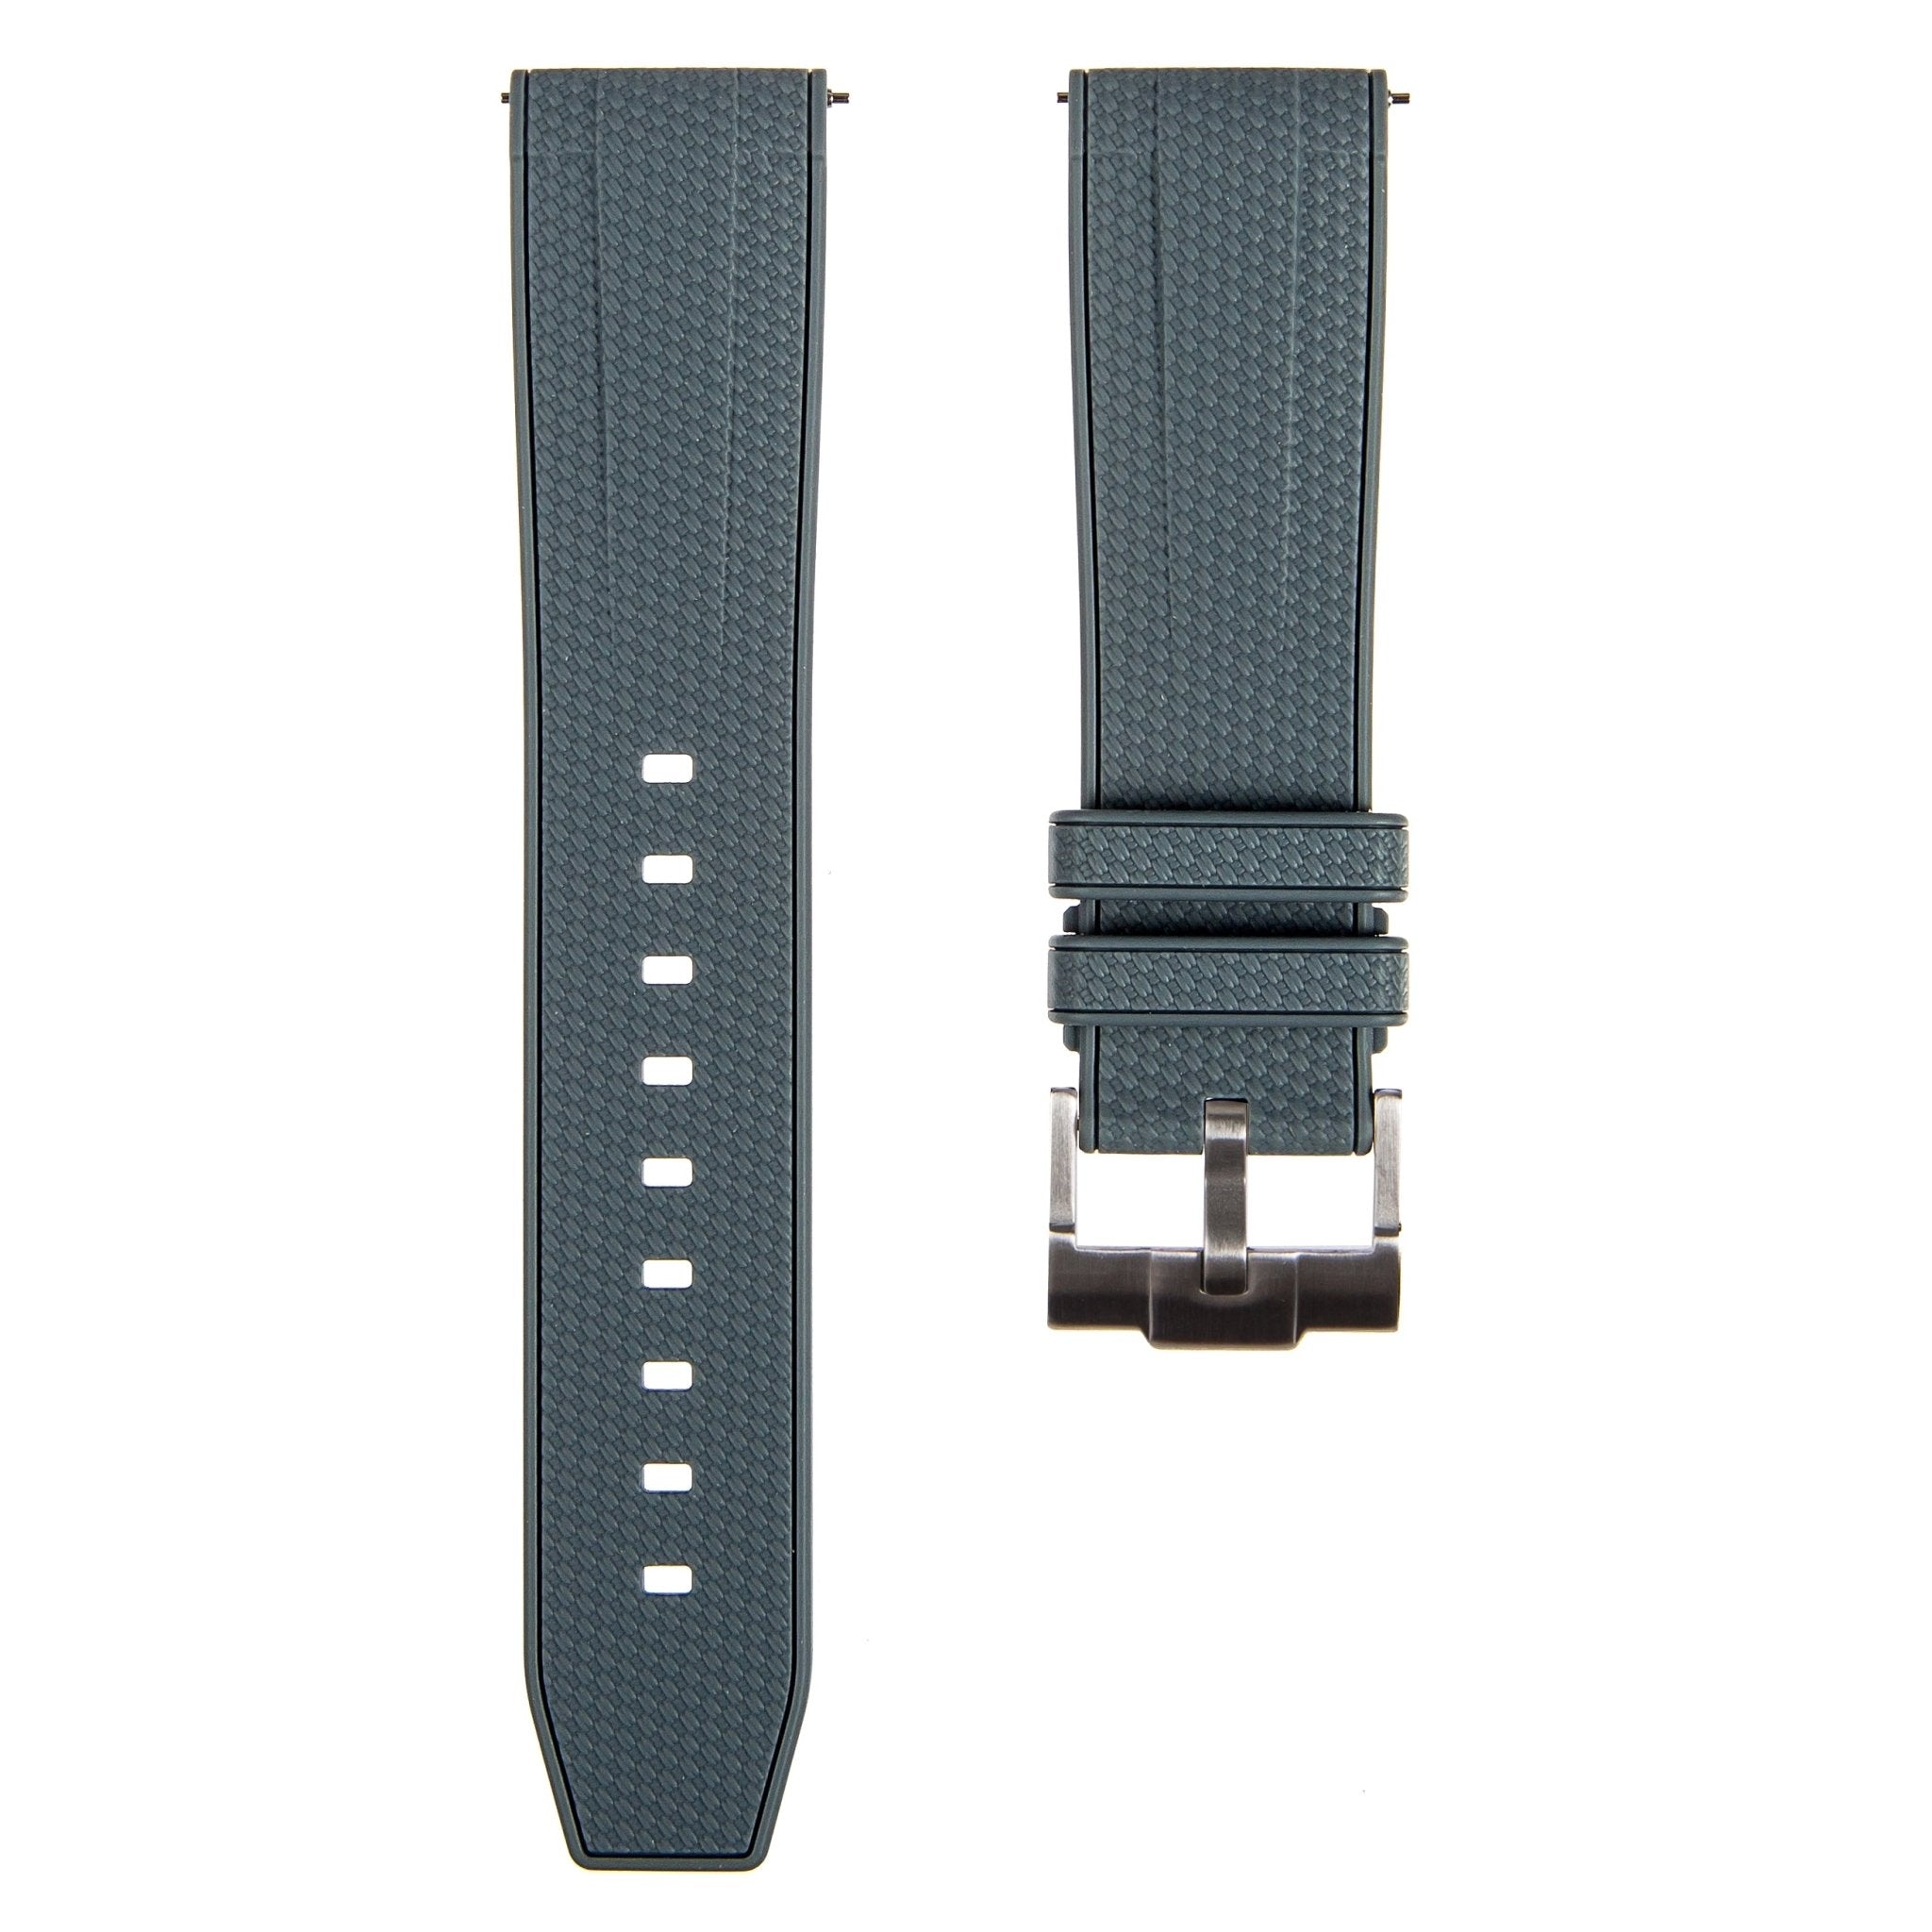 Flexweave Premium SIlicone Rubber Strap - Quick-Release - Compatible with Blancpain x Swatch – Grey (2423) -Strapseeker